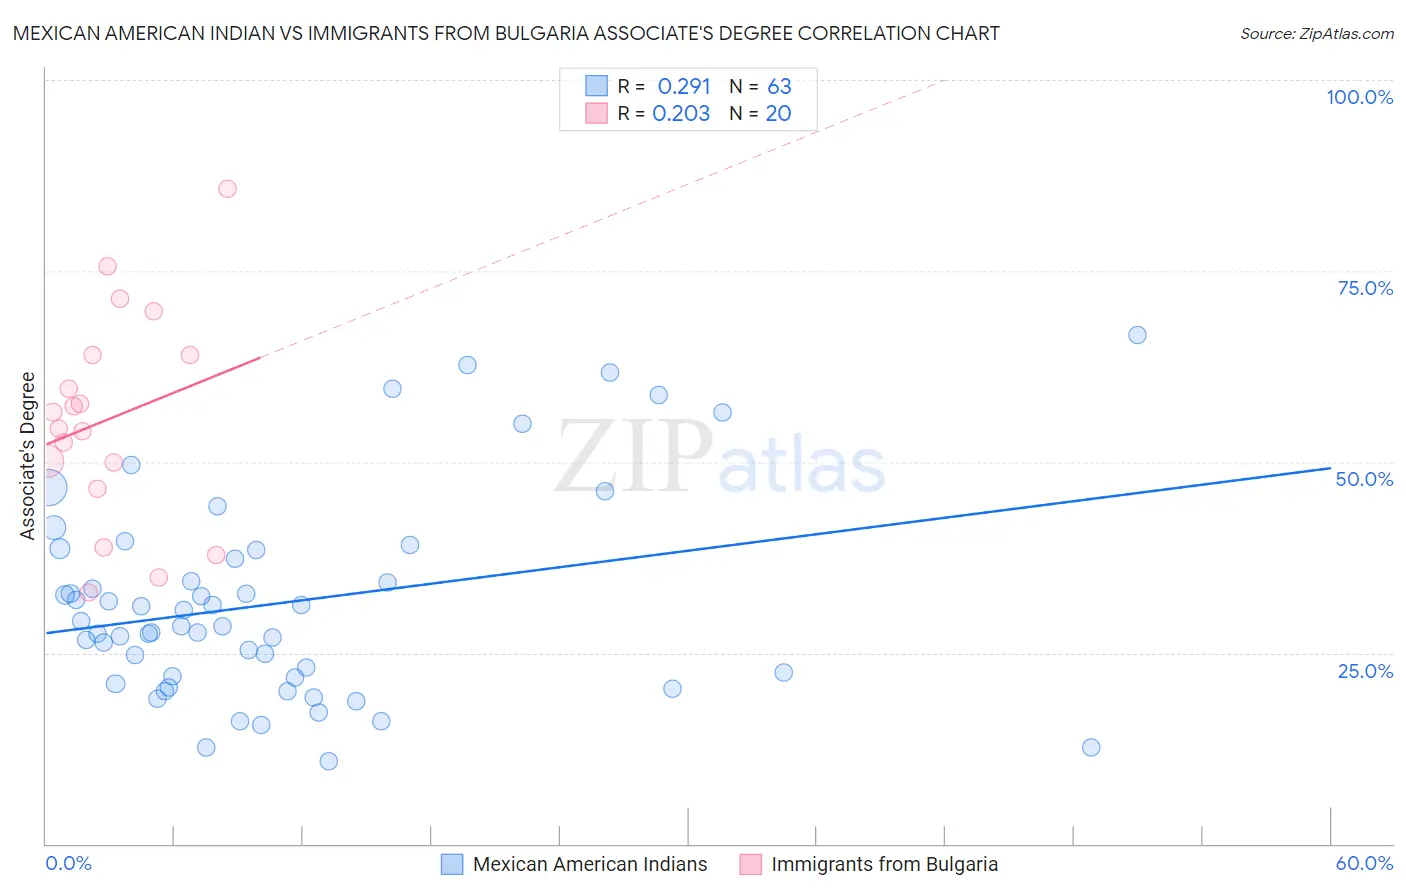 Mexican American Indian vs Immigrants from Bulgaria Associate's Degree